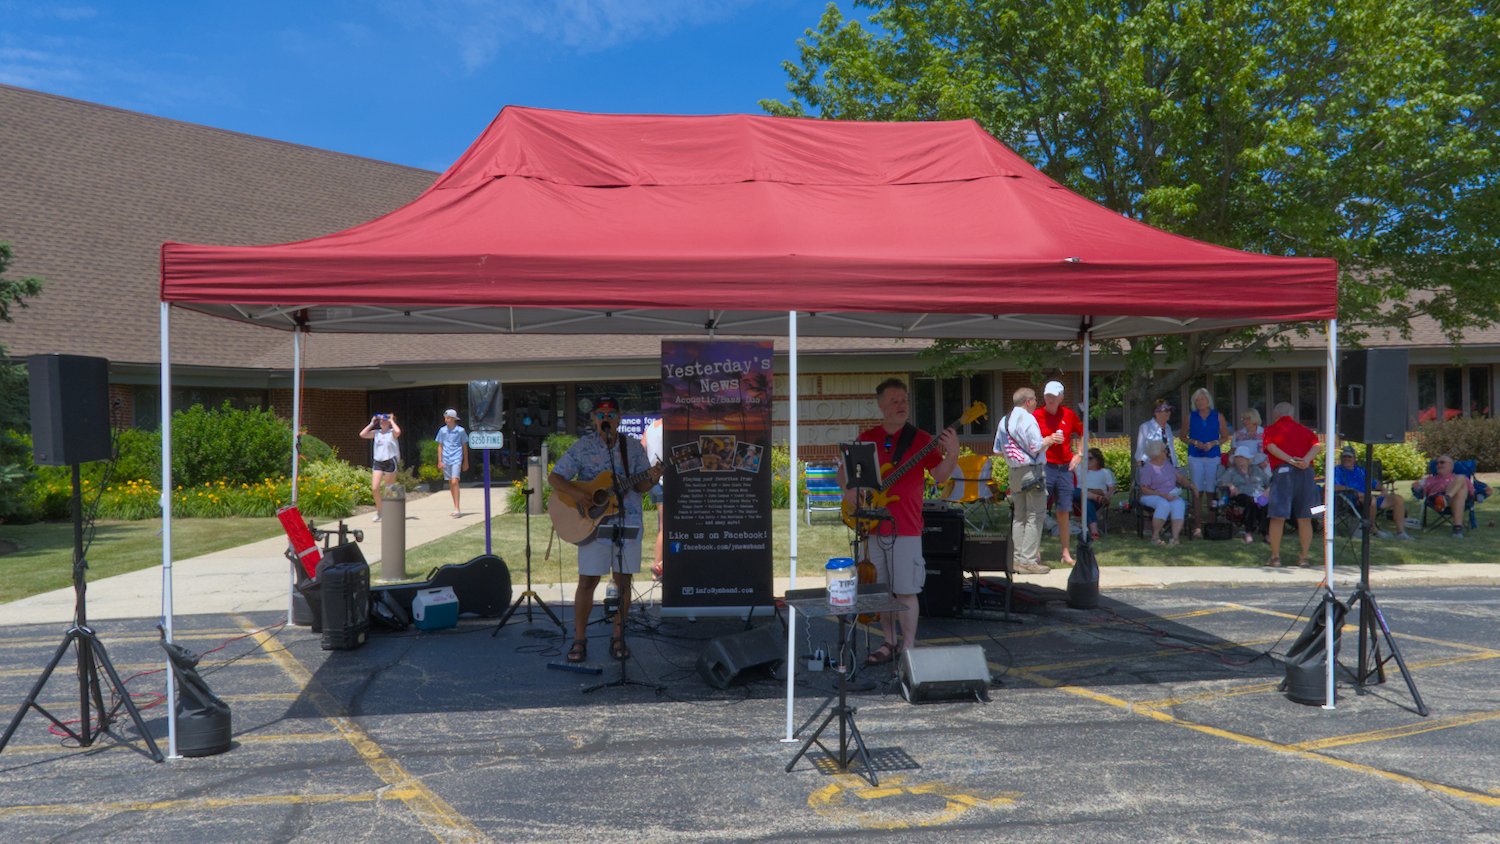 Yesterday's News serving up the pre-parade tunes in the First Church parking lot.